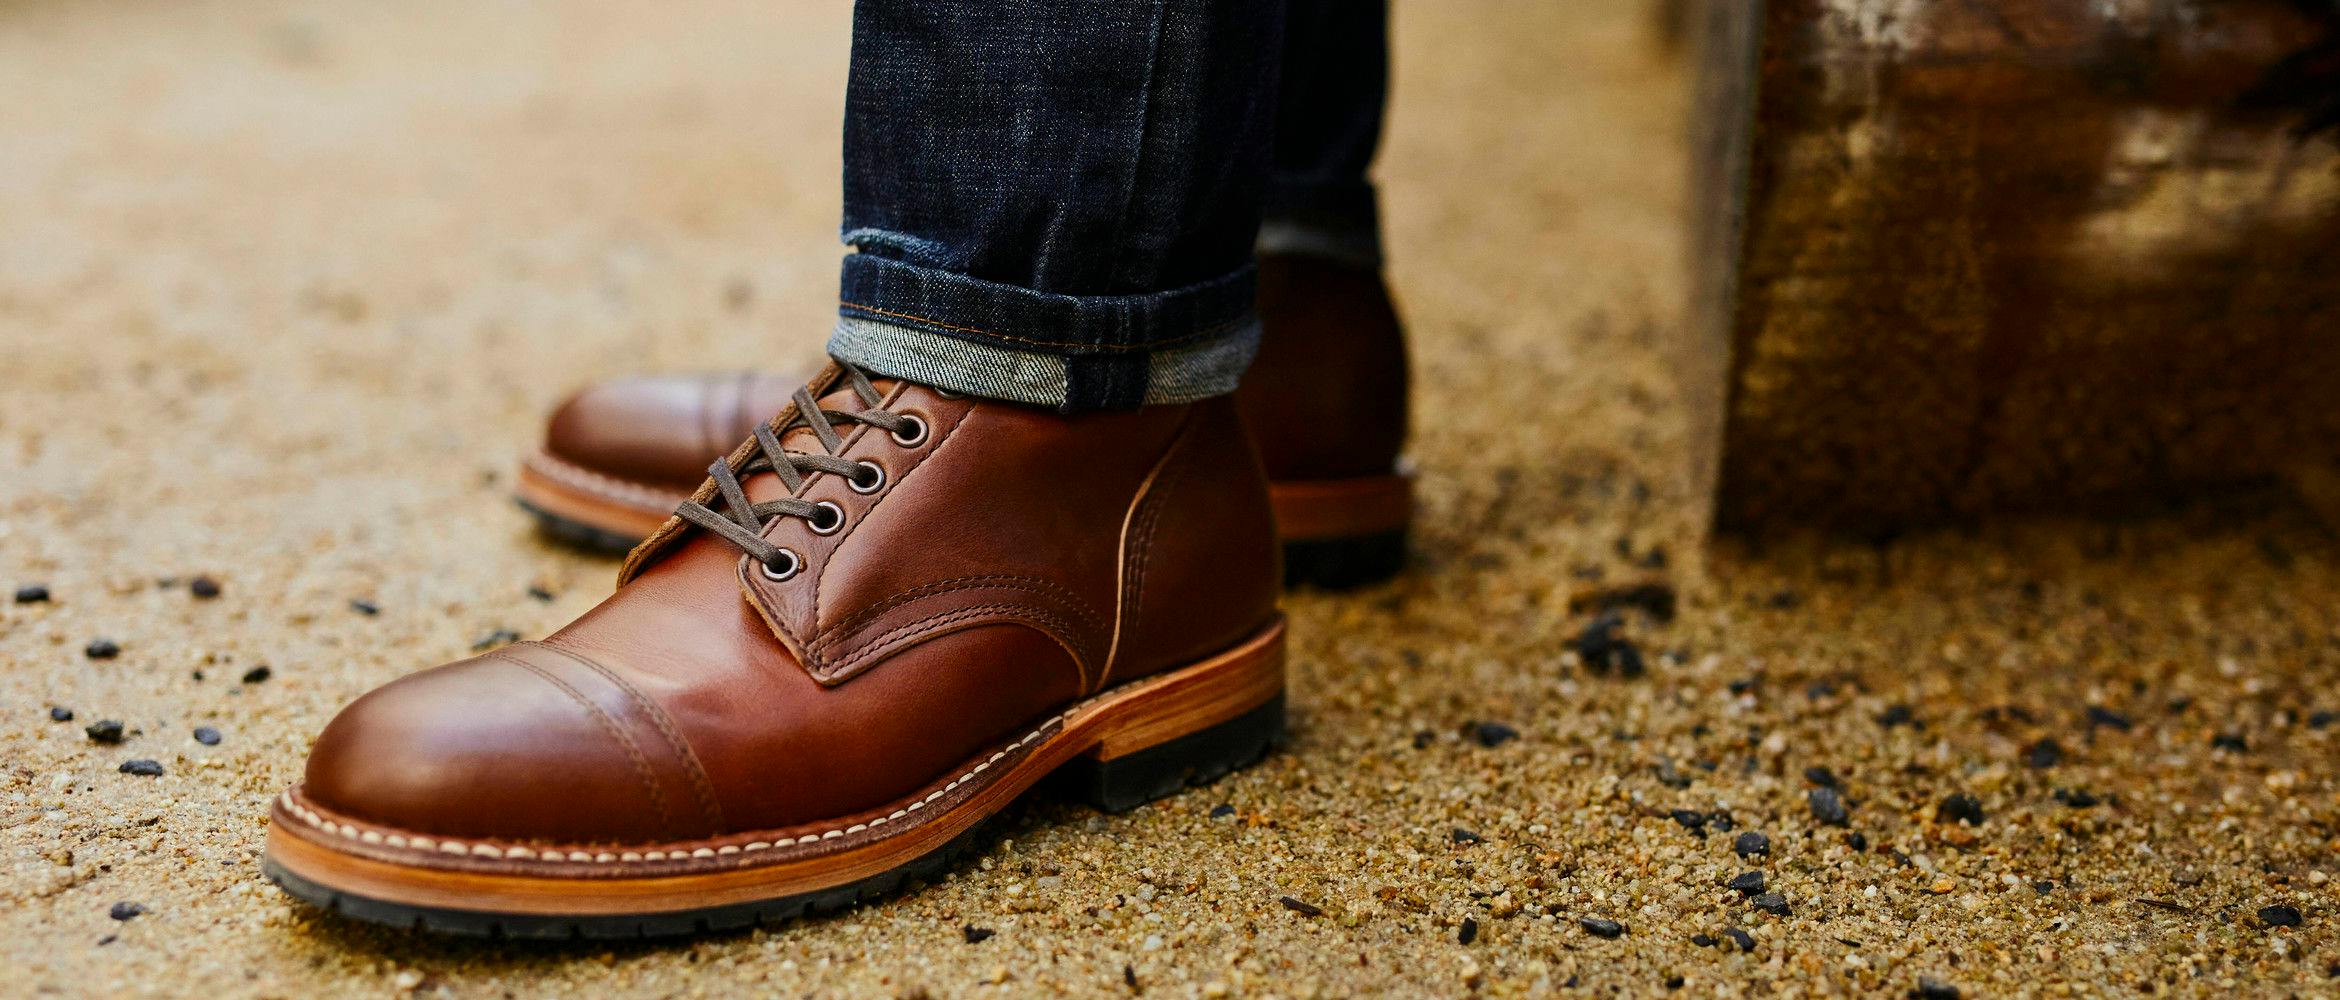 Red Wing Shoes opening new store in Grand Island